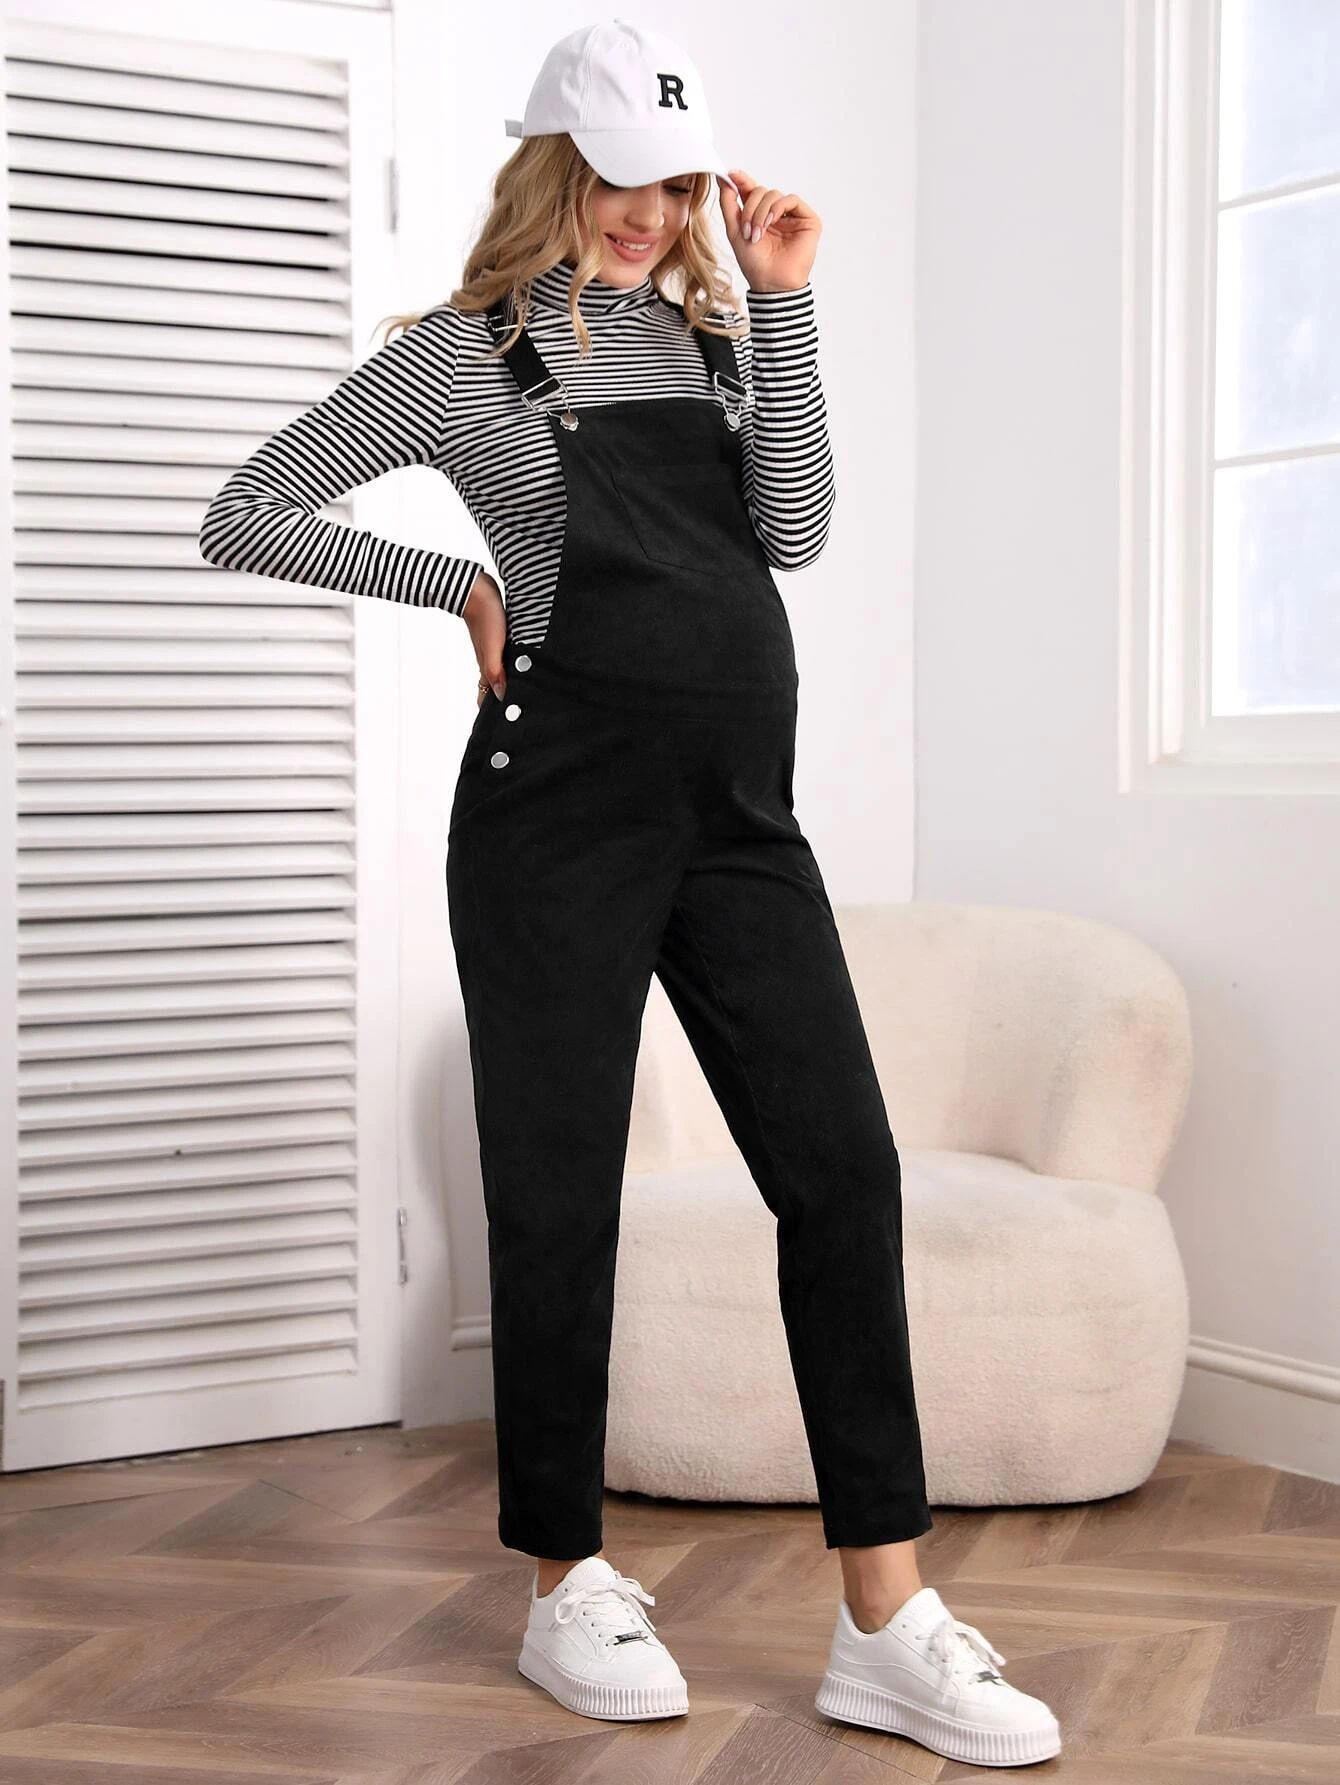 SHEIN Maternity Patched Pocket Overall Jumpsuit Without Tee | SHEIN